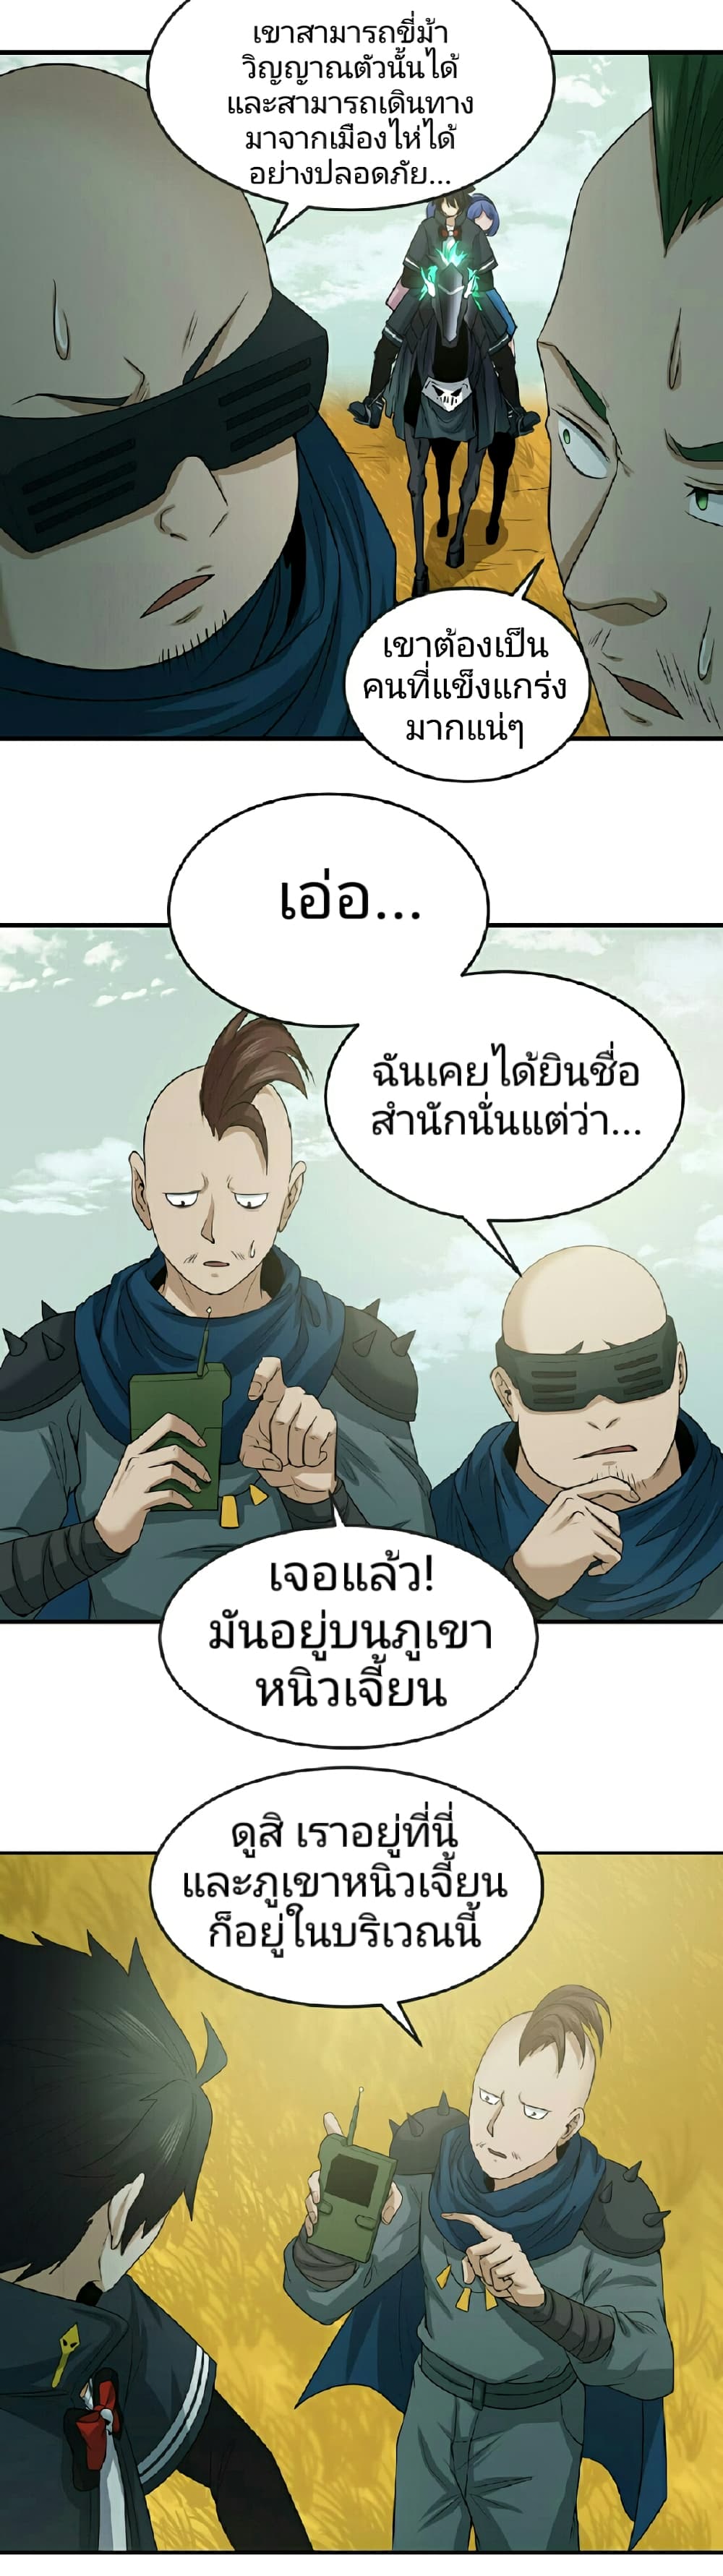 The Age of Ghost Spirits à¸à¸­à¸à¸à¸µà¹ 48 (25)